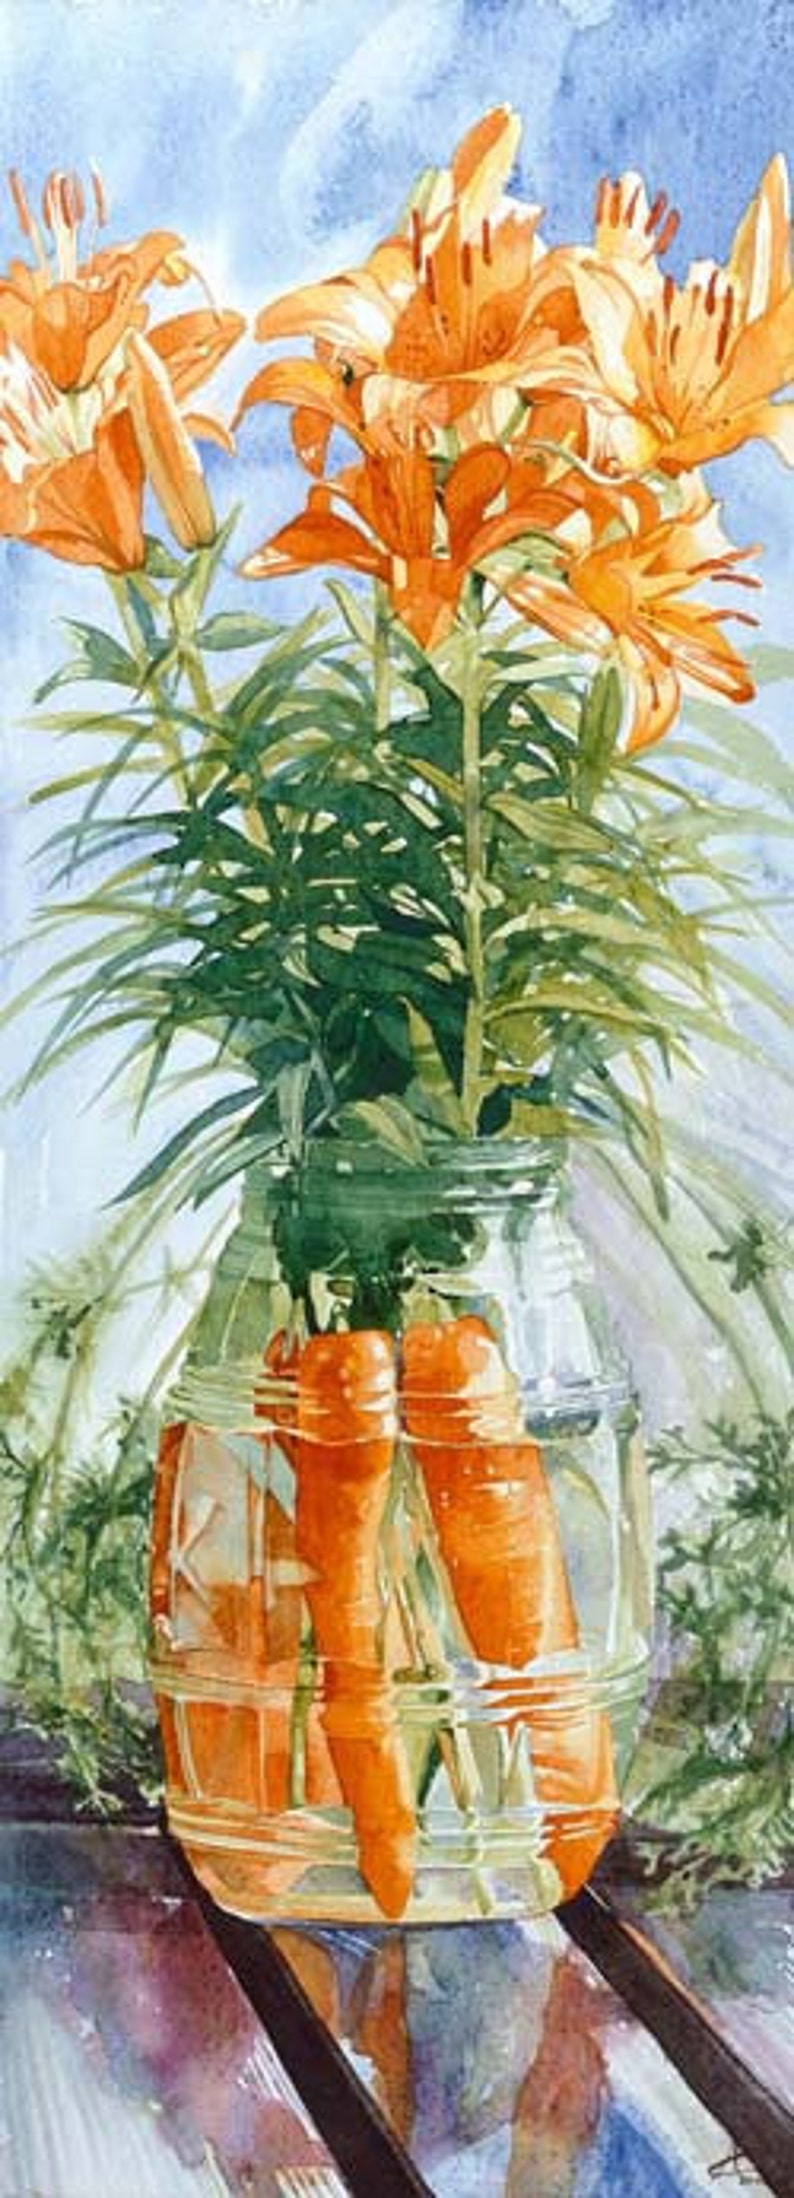 Carrots & flowers in a vase on picnic bench, Watercolour Giclée print image 1